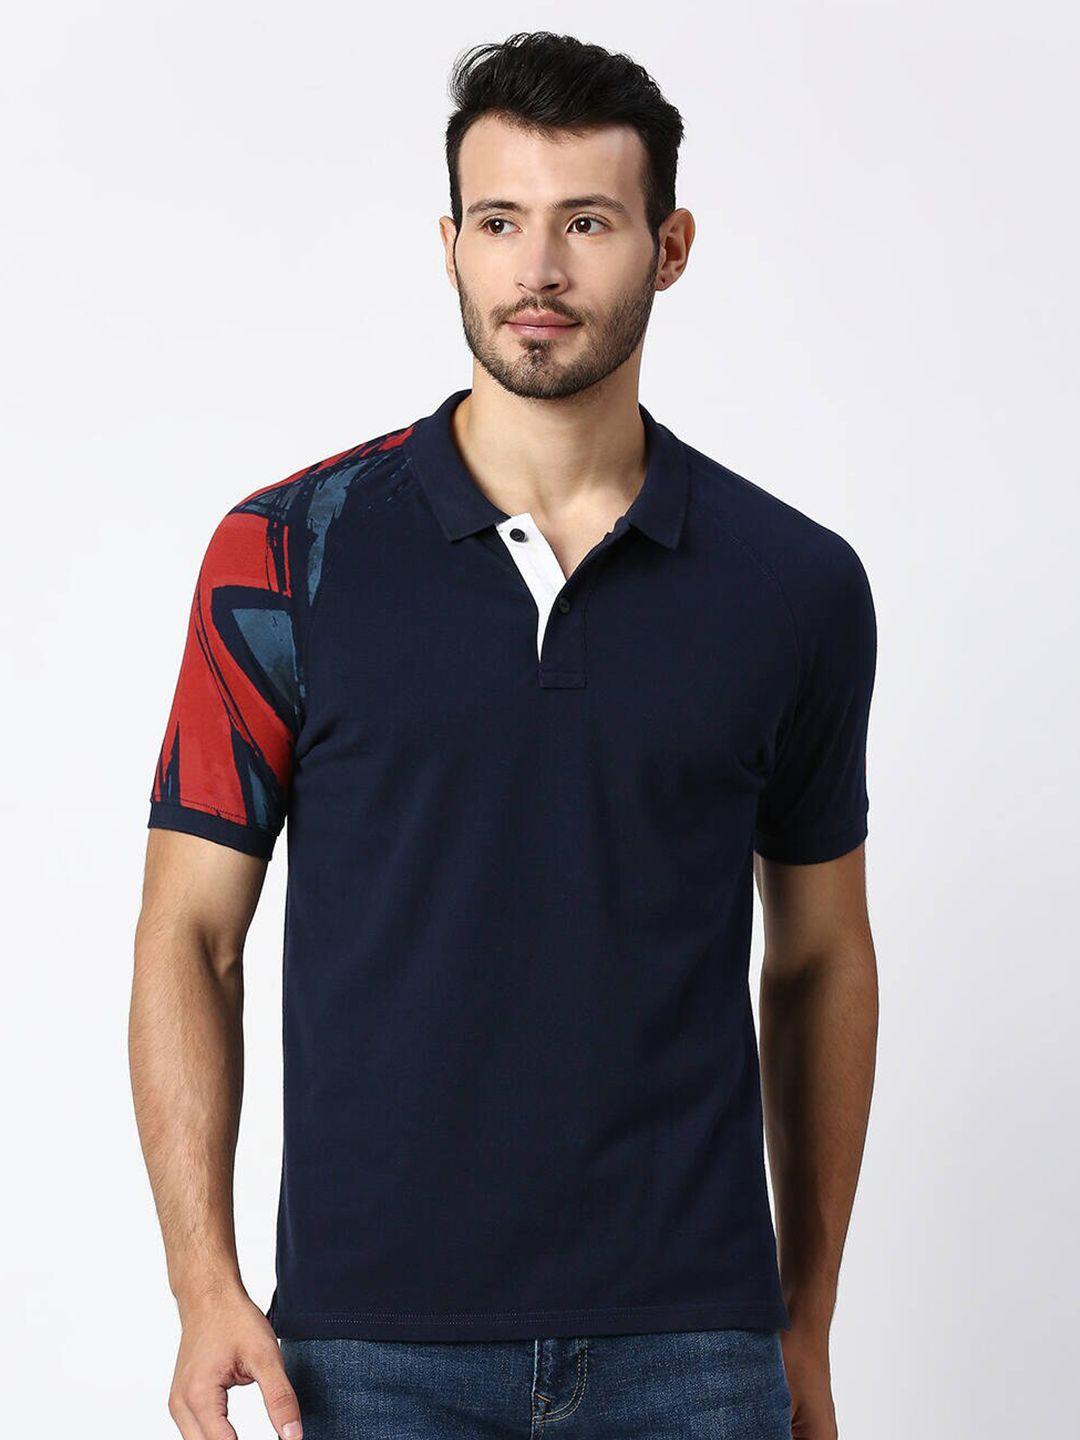 pepe jeans men navy blue & red  printed polo collar cotton t-shirt